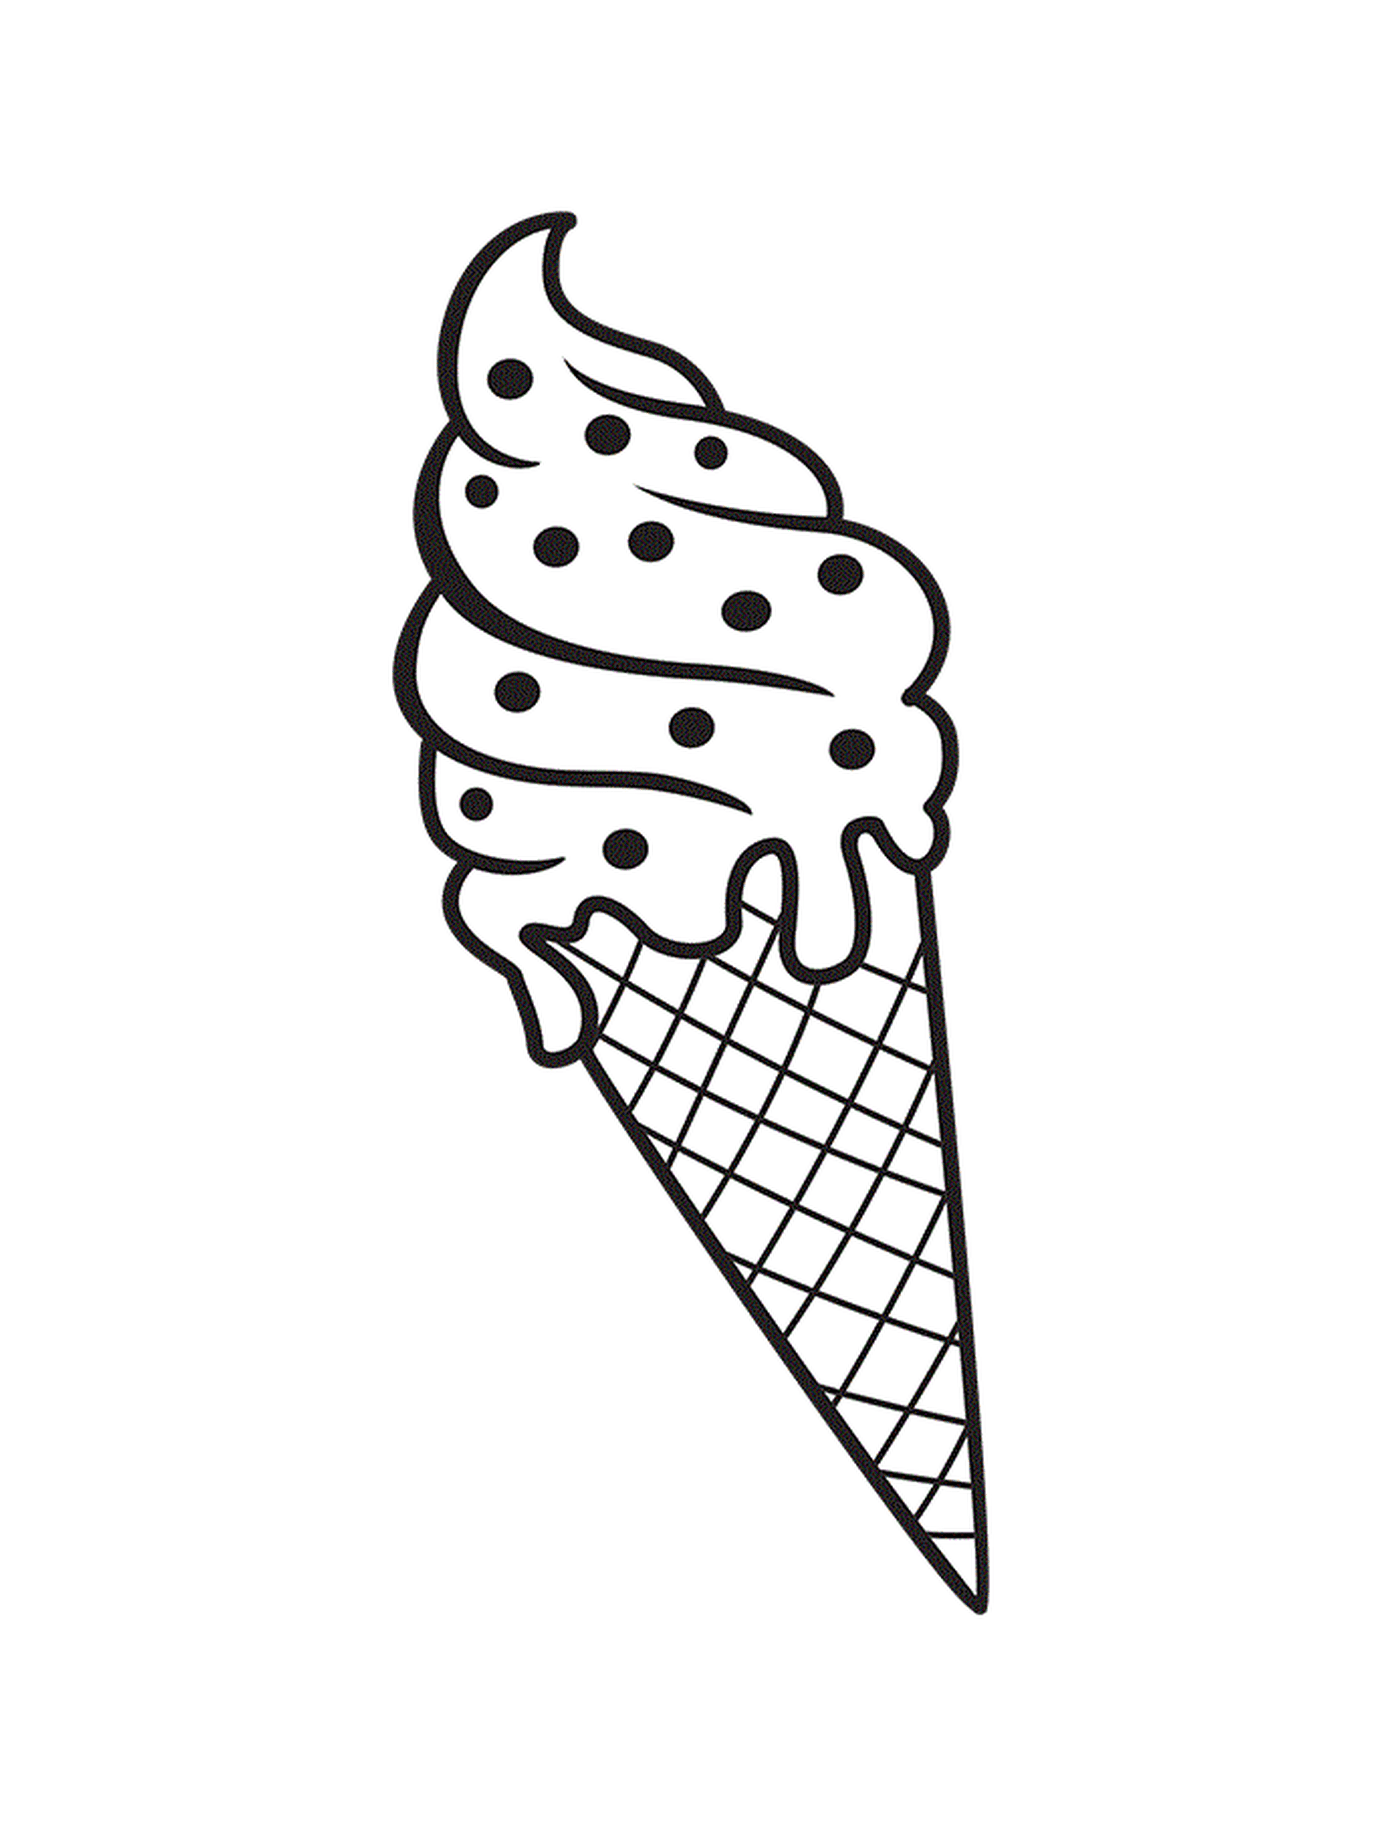  A large chocolate ice cream cone on summer vacation 